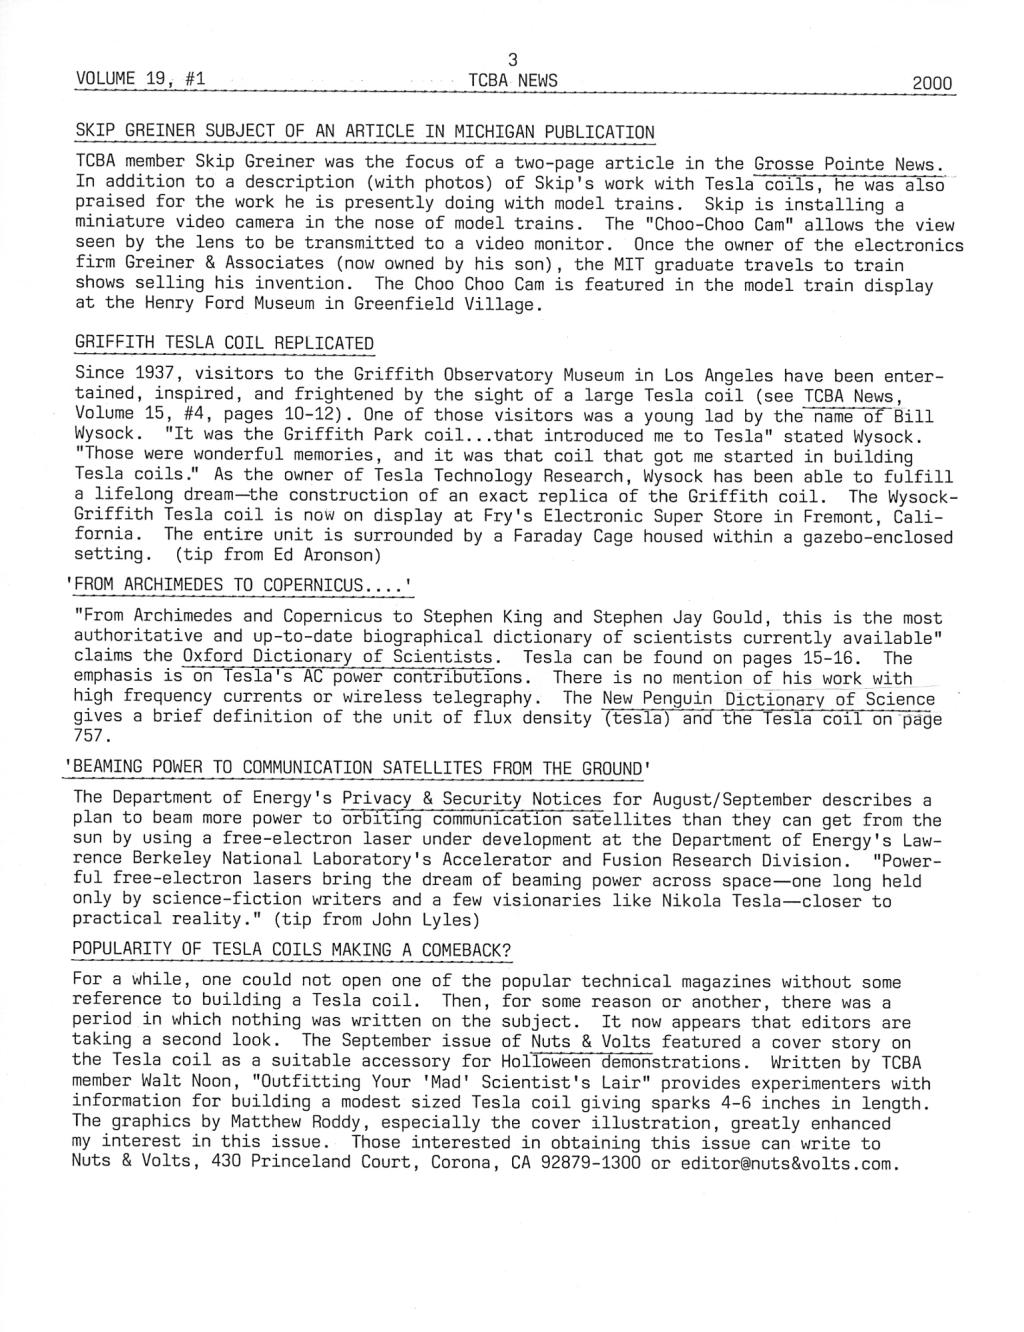 TCBA Volume 19 - Issue 1 - Page 3 of 18